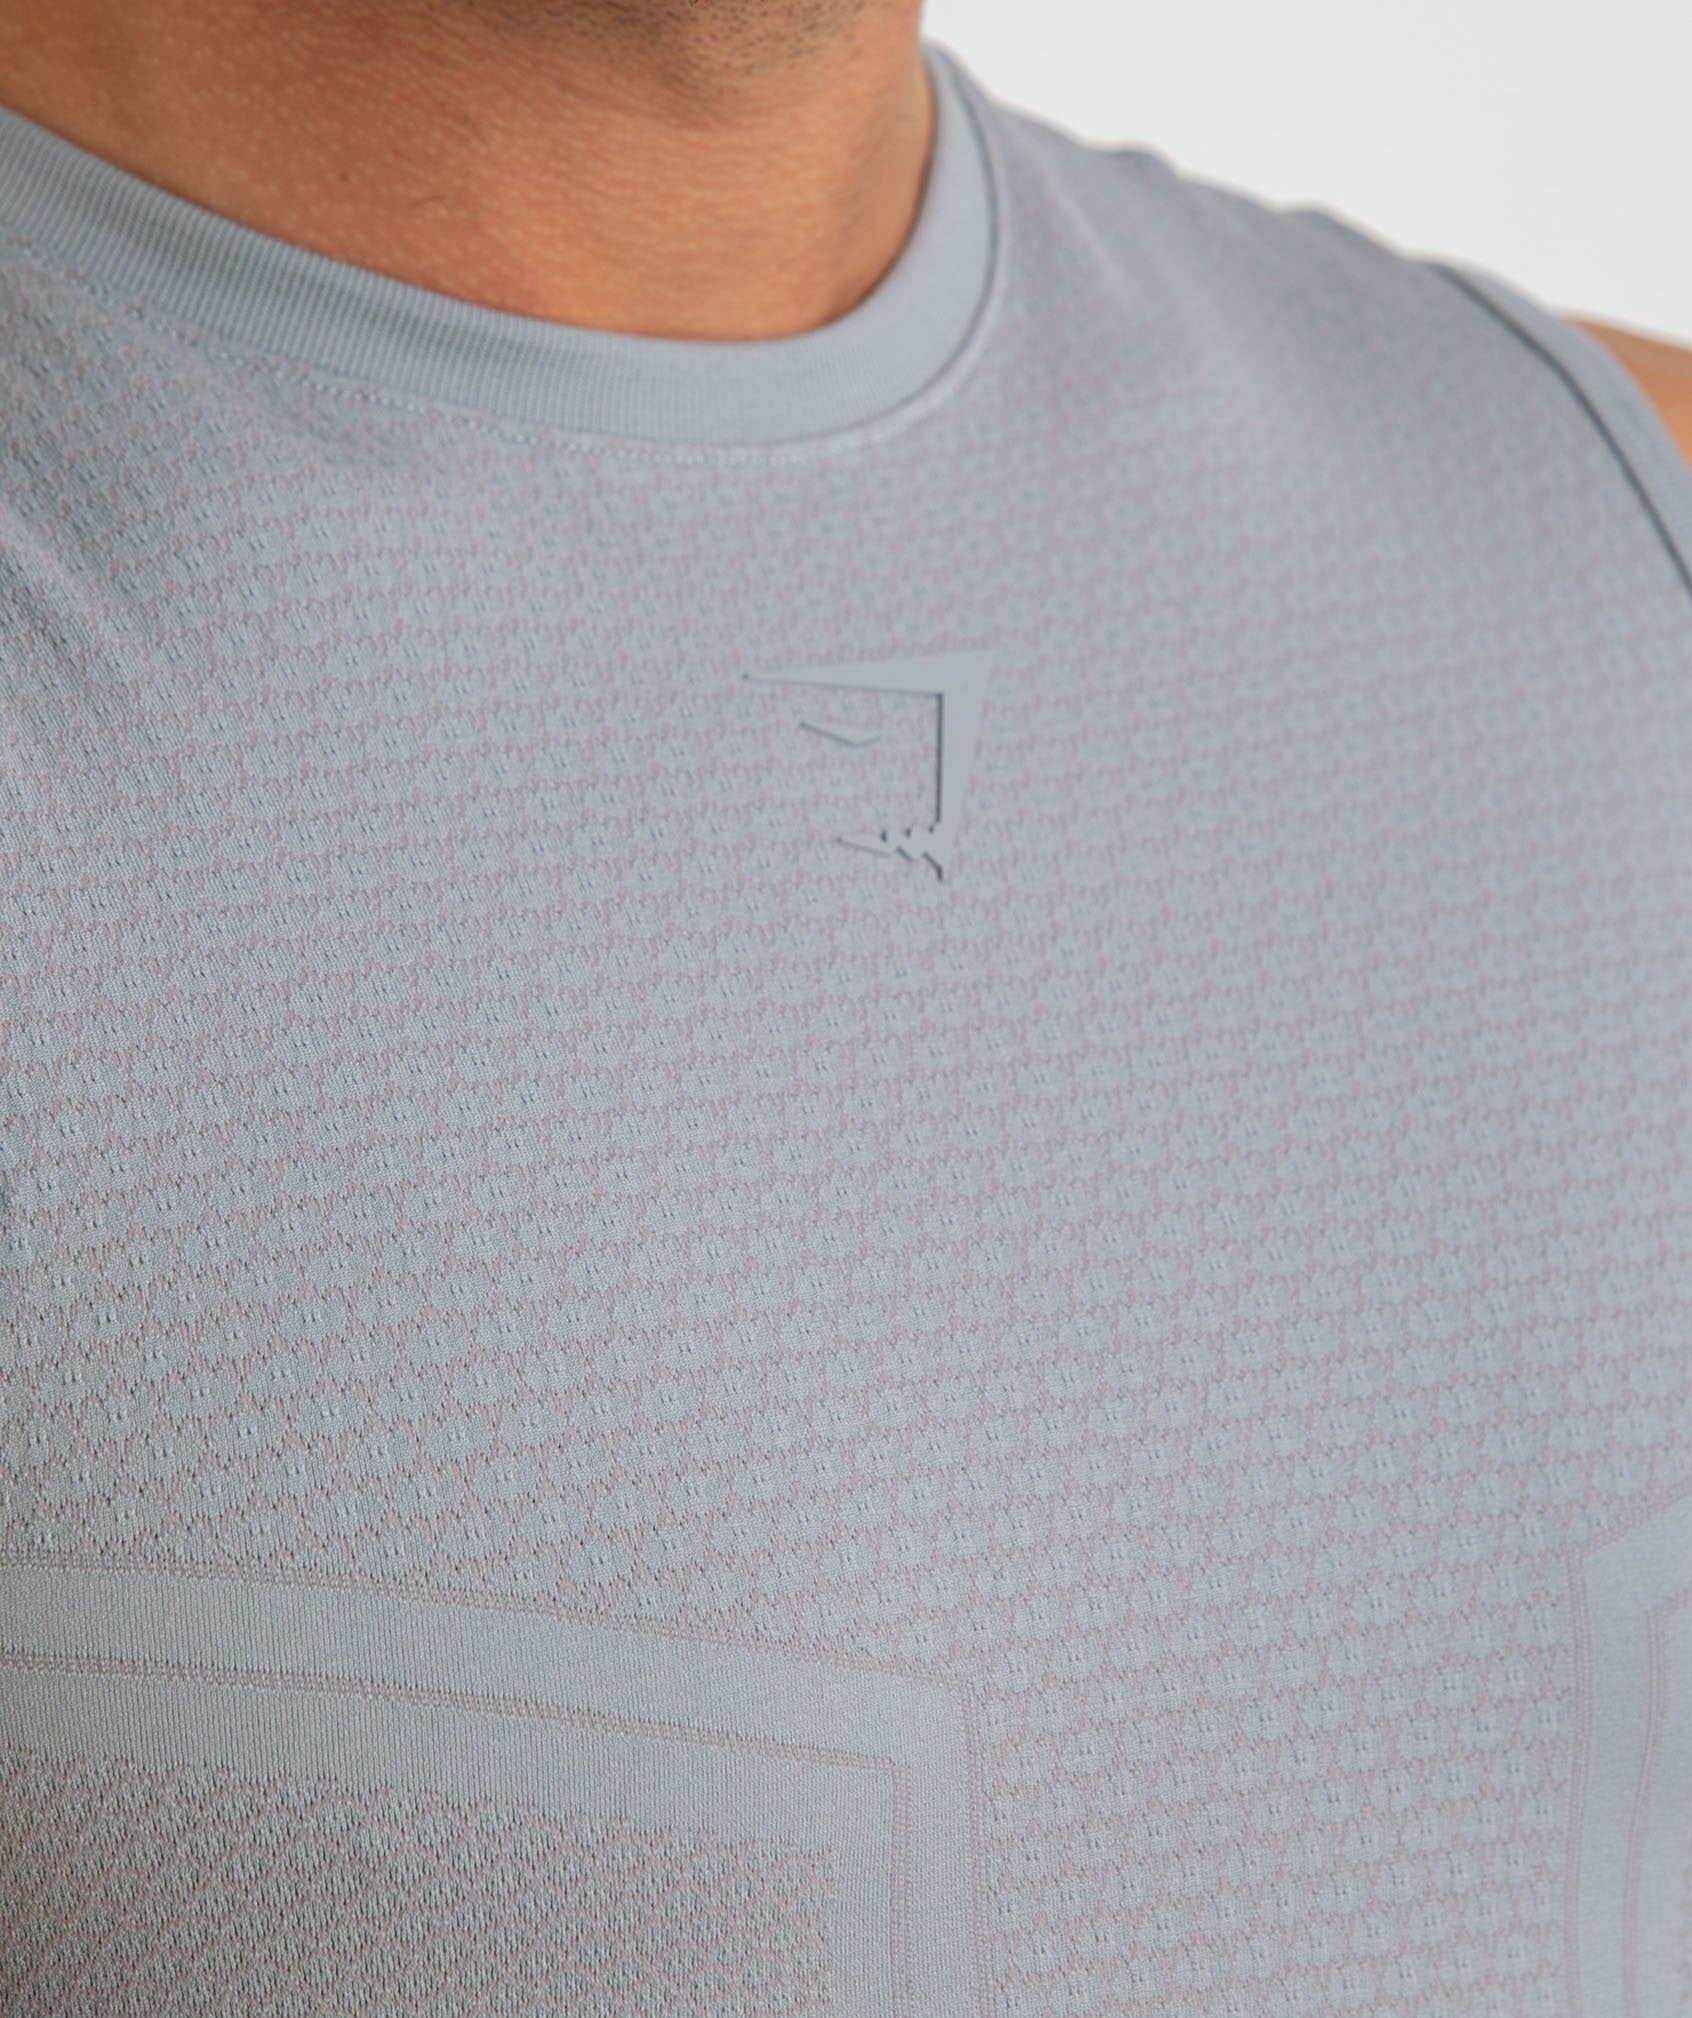 Onyx Imperial Tank in Light Grey - view 5